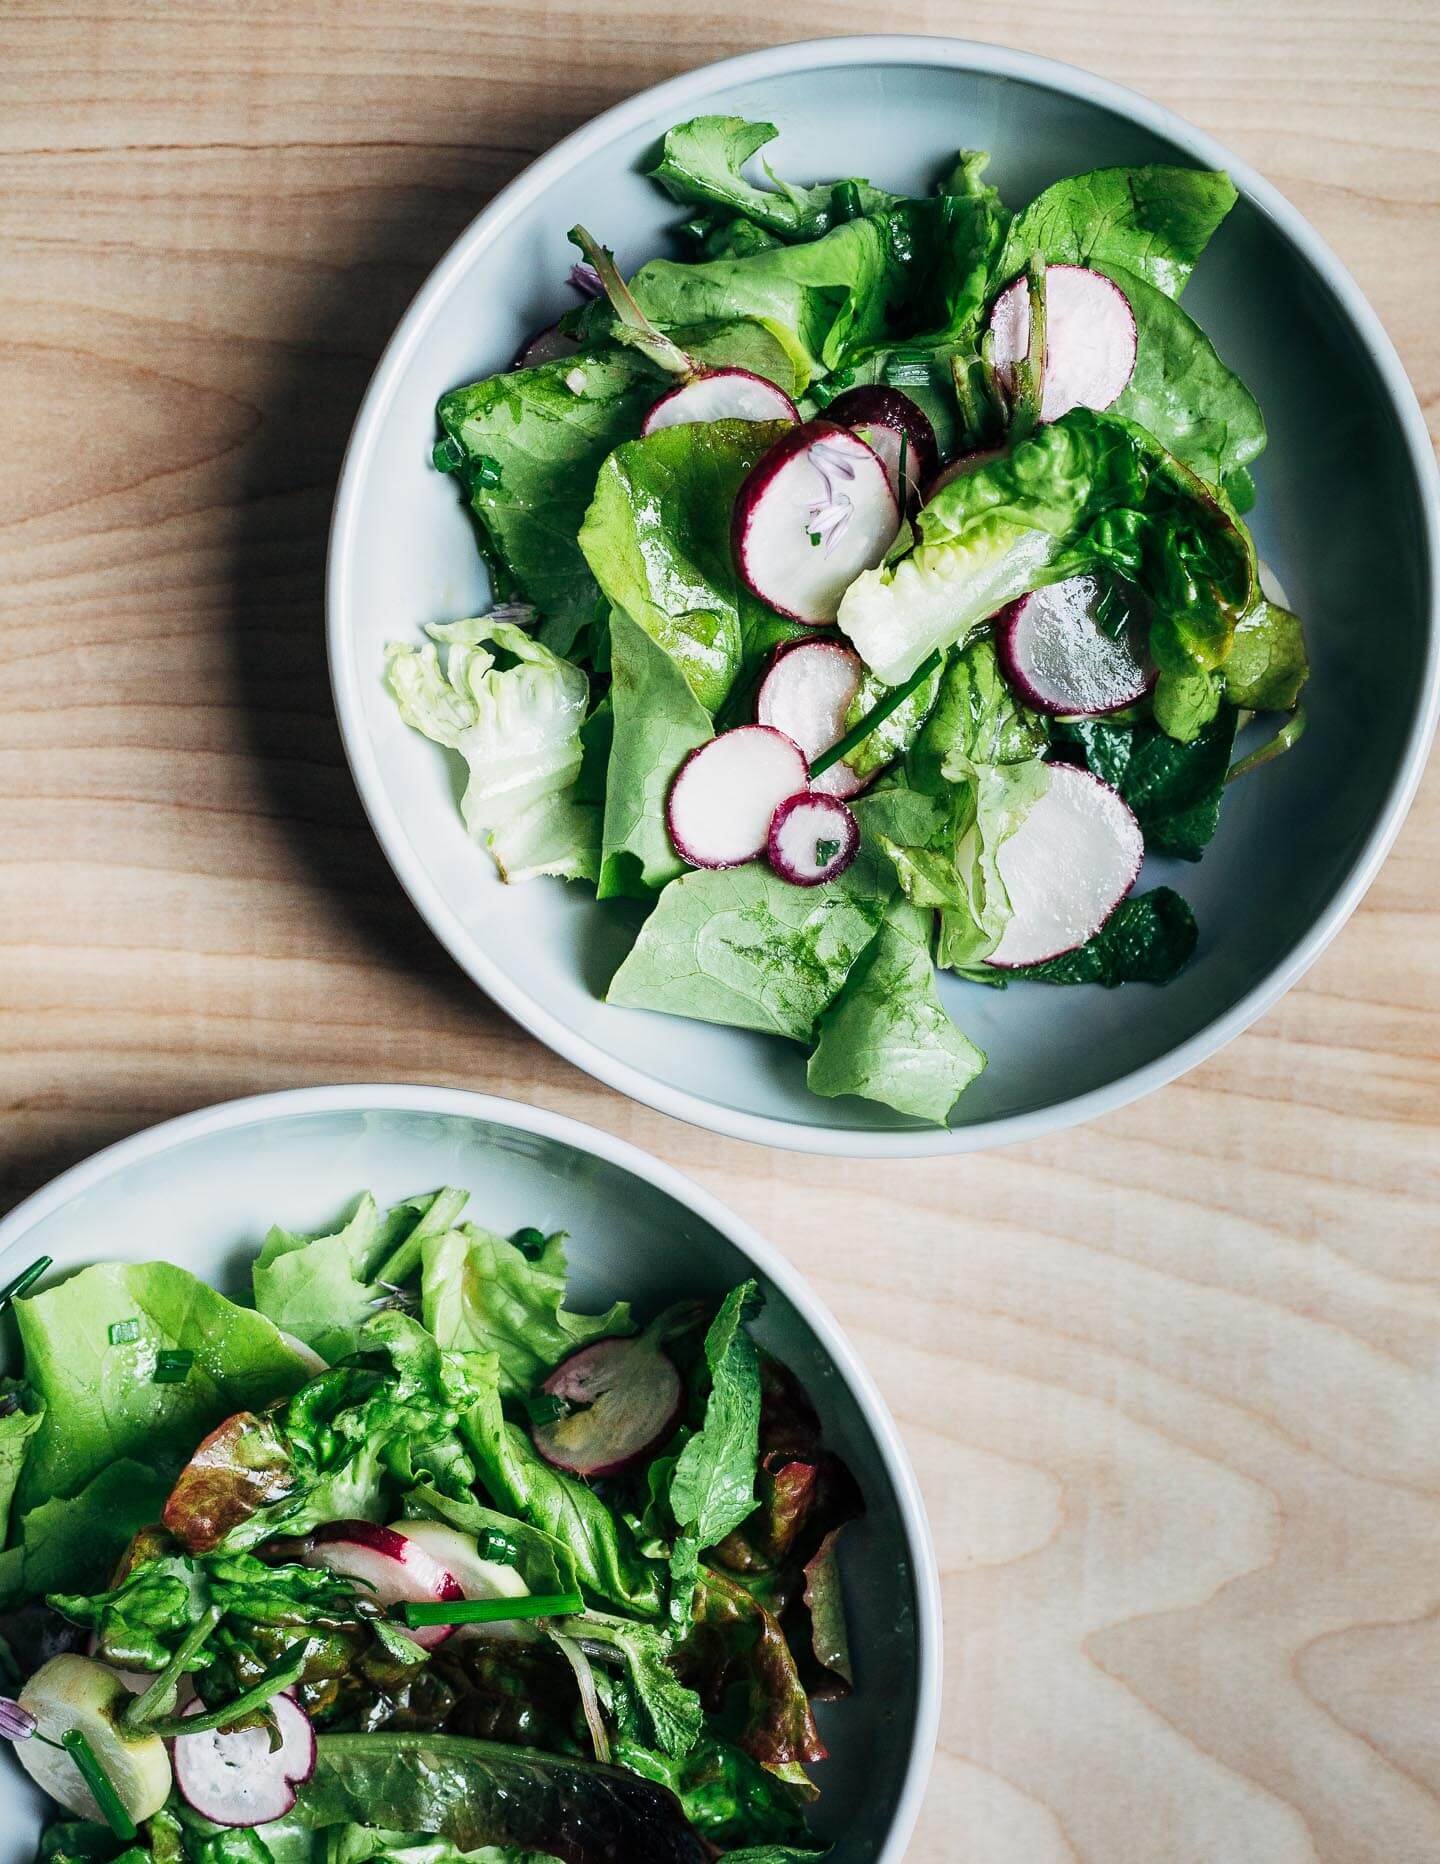 A simple green salad in small bowls. 